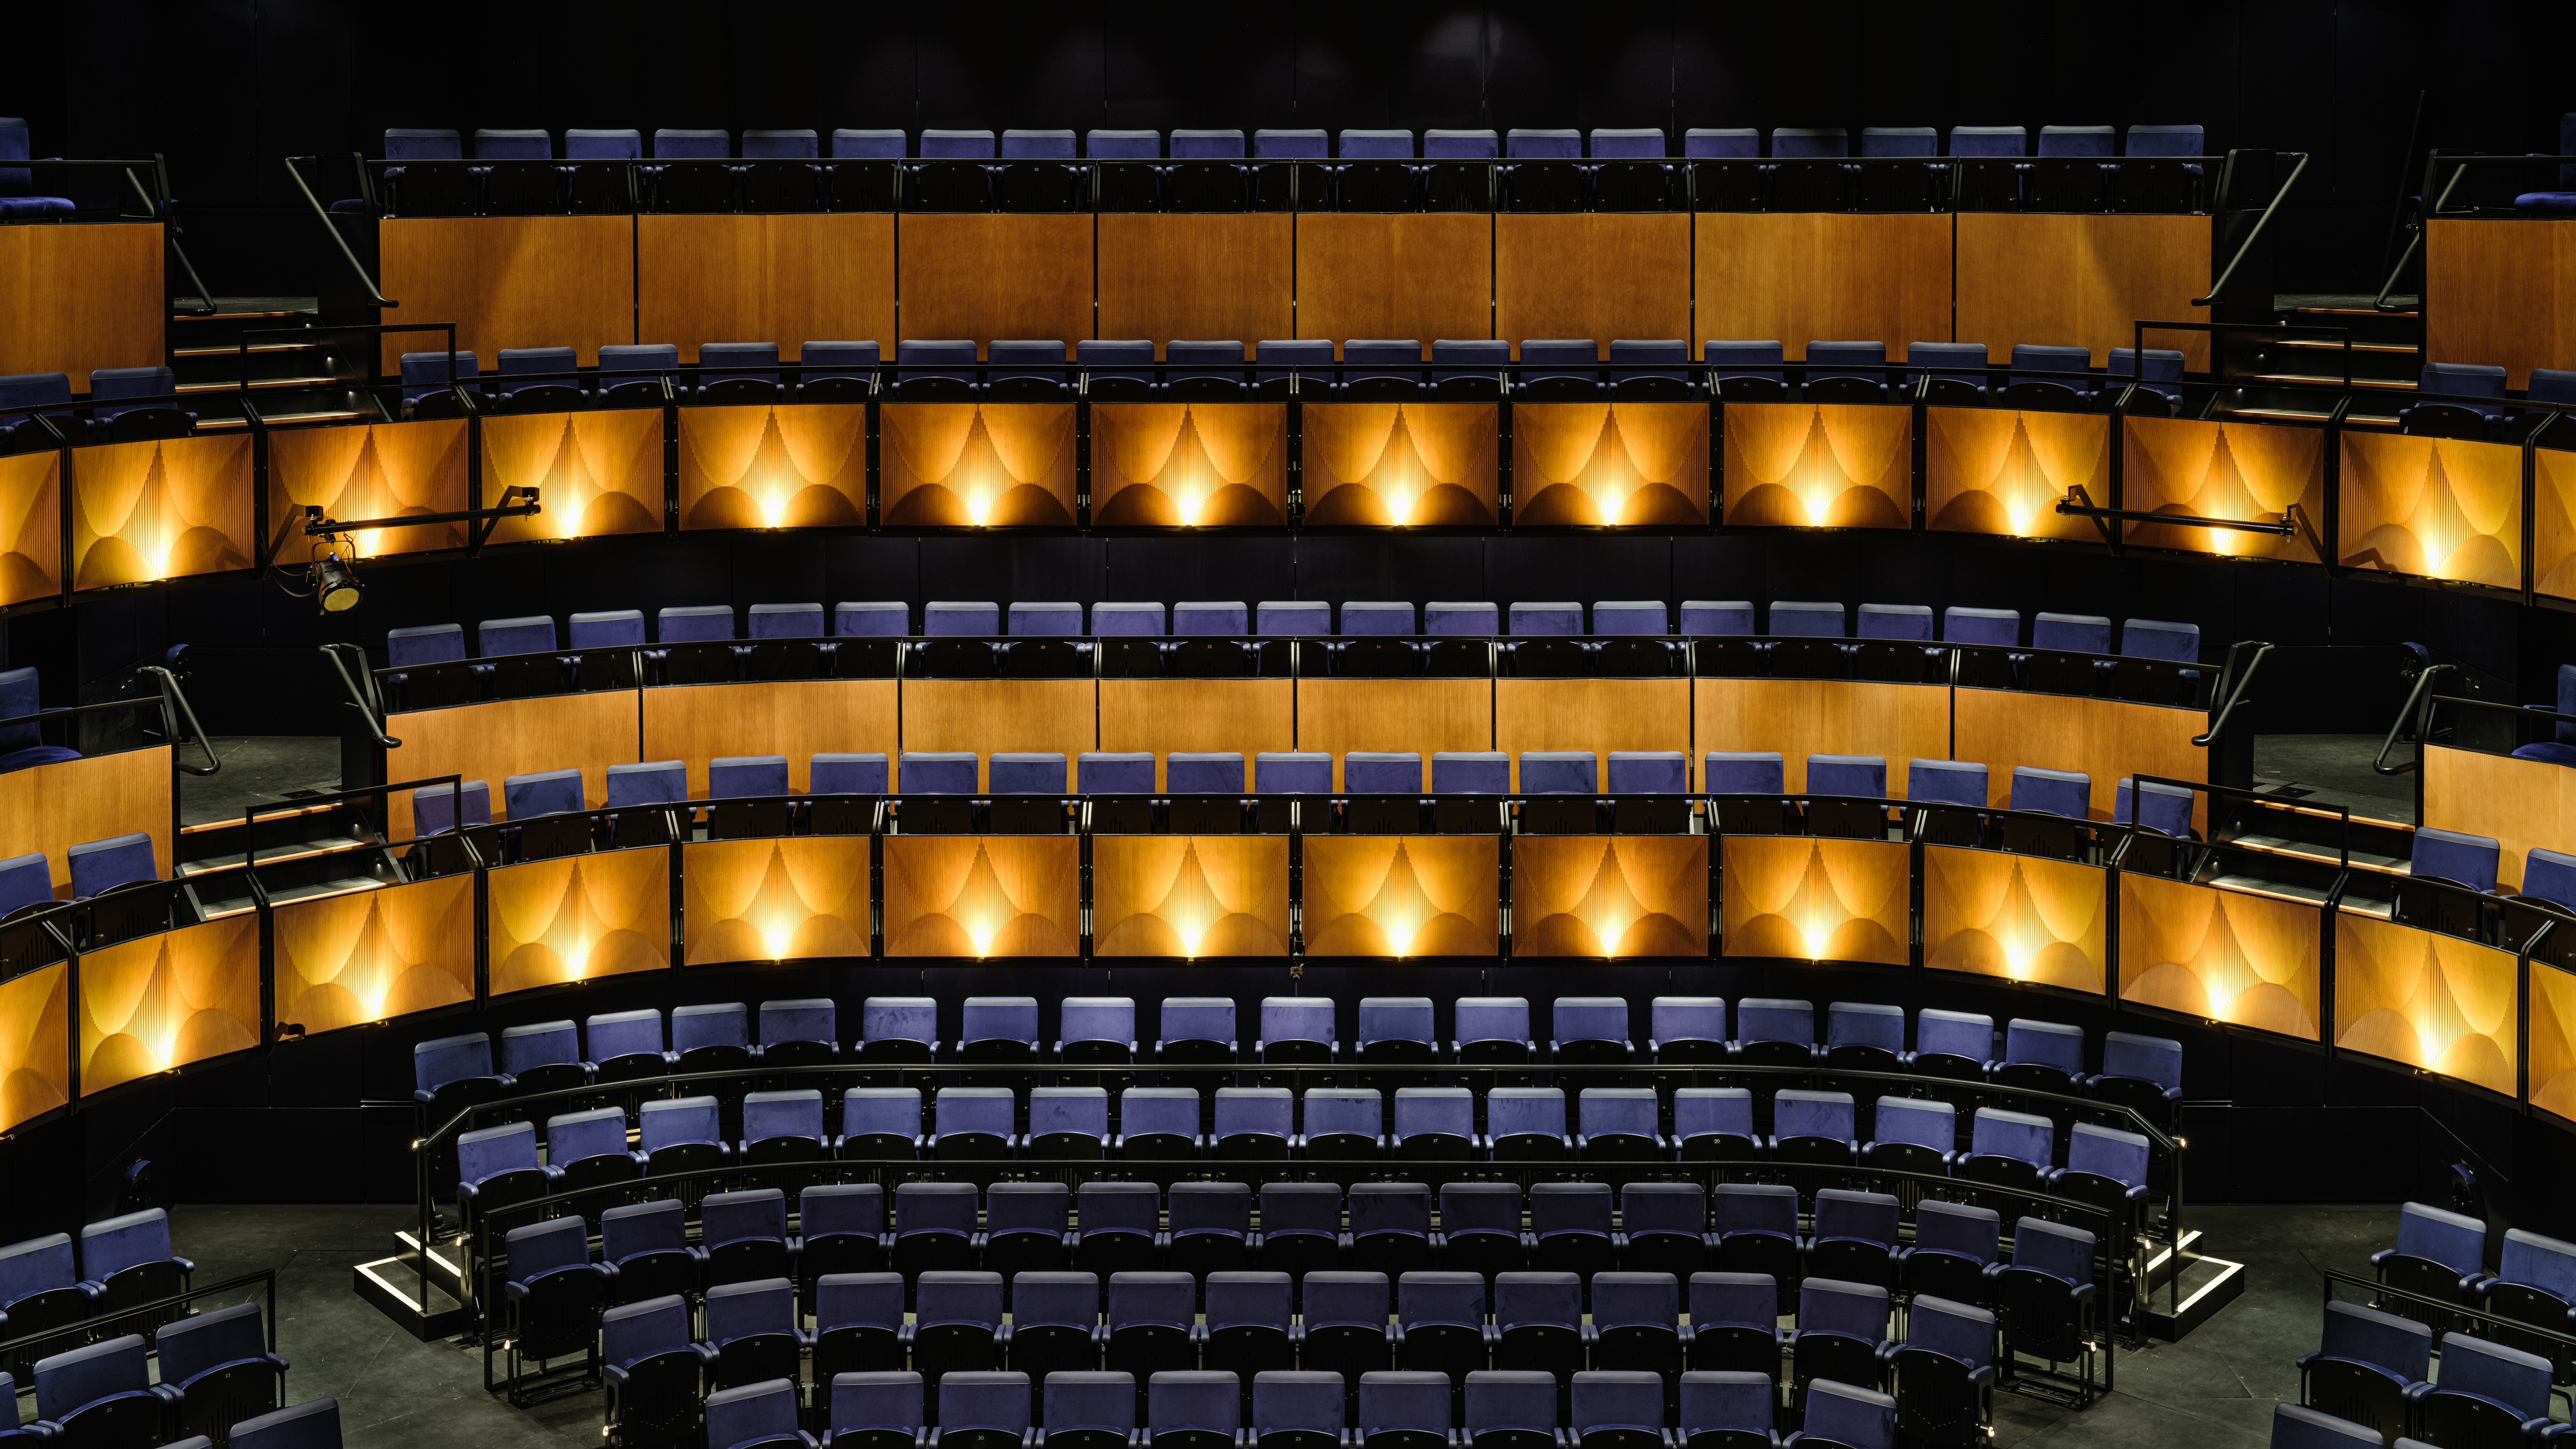 Interior of @sohoplace theatre with navy blue seats and warm yellow lighting